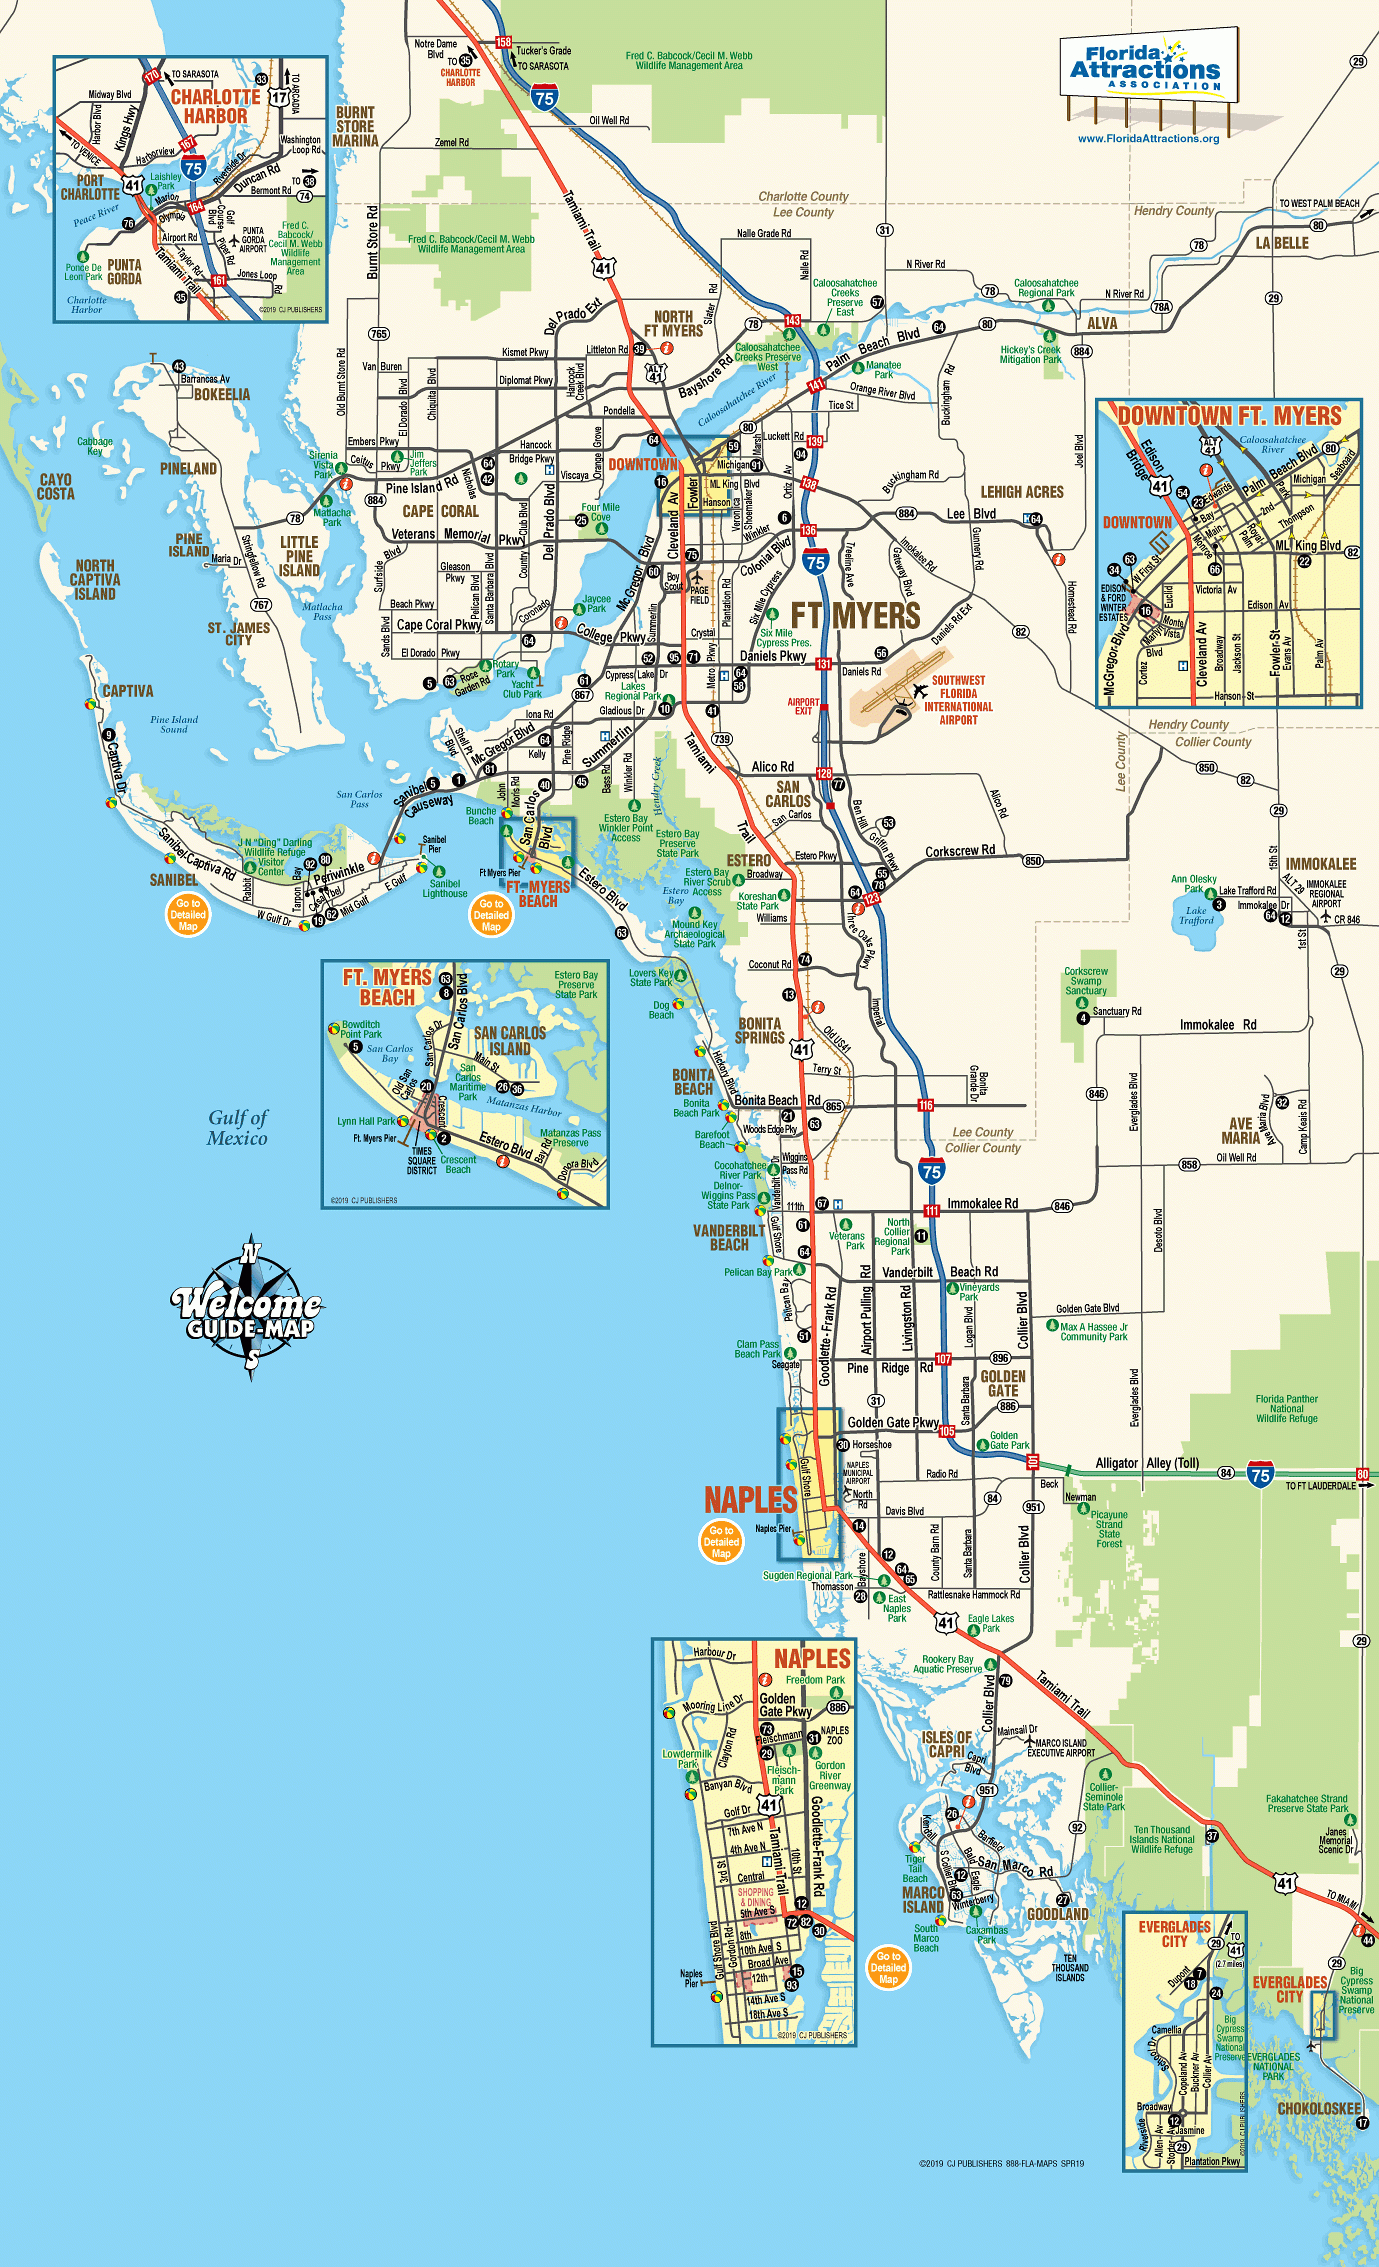 Map Of Southwest Florida - Welcome Guide-Map To Fort Myers &amp;amp; Naples - Estero Beach Florida Map